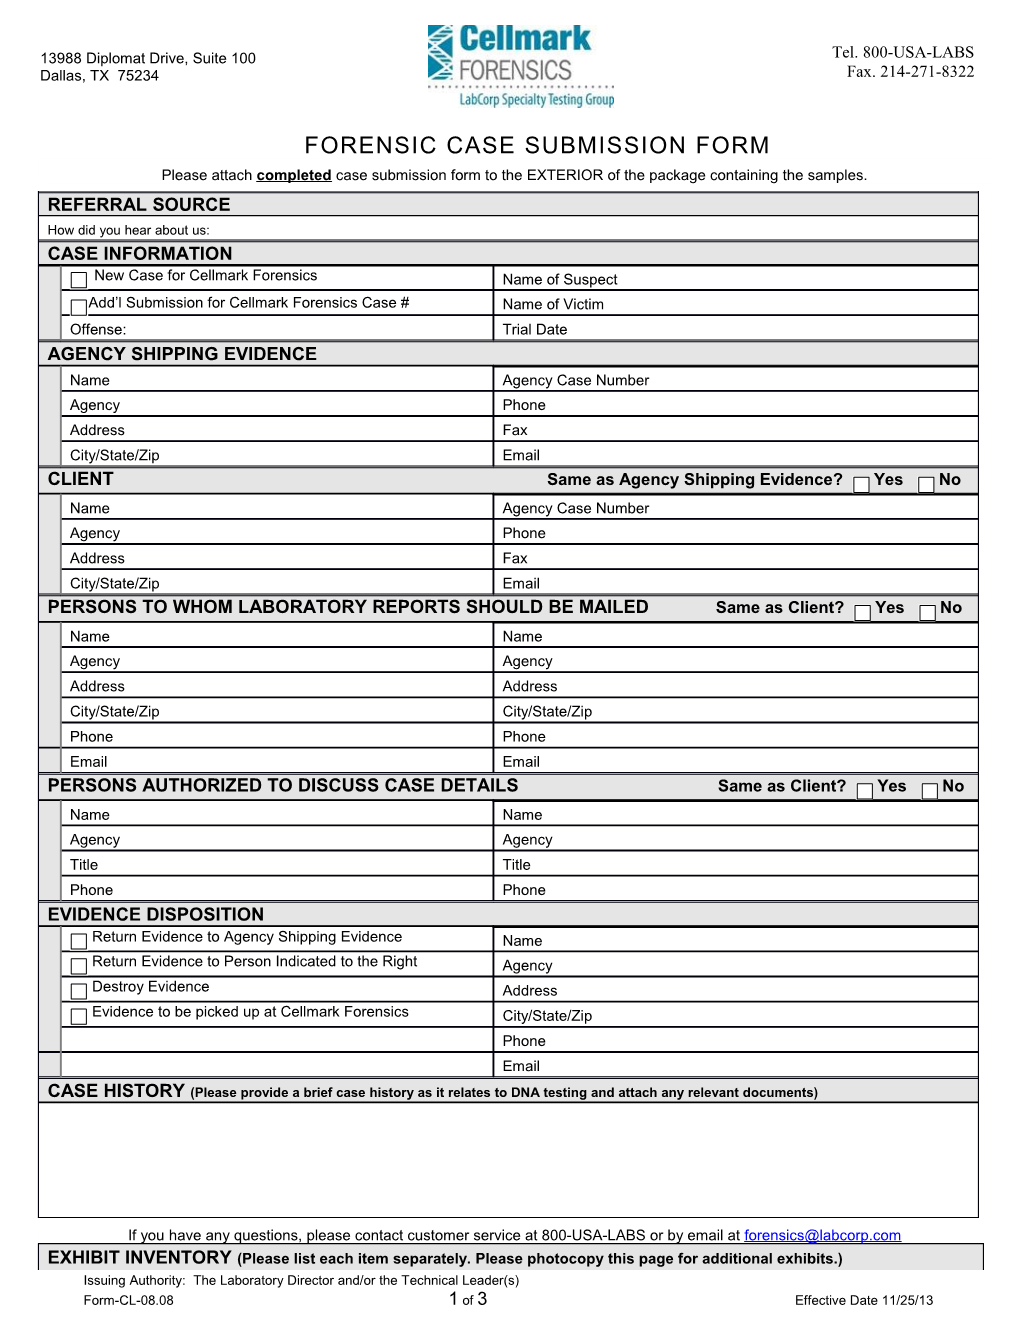 Forensic Case Submission Form